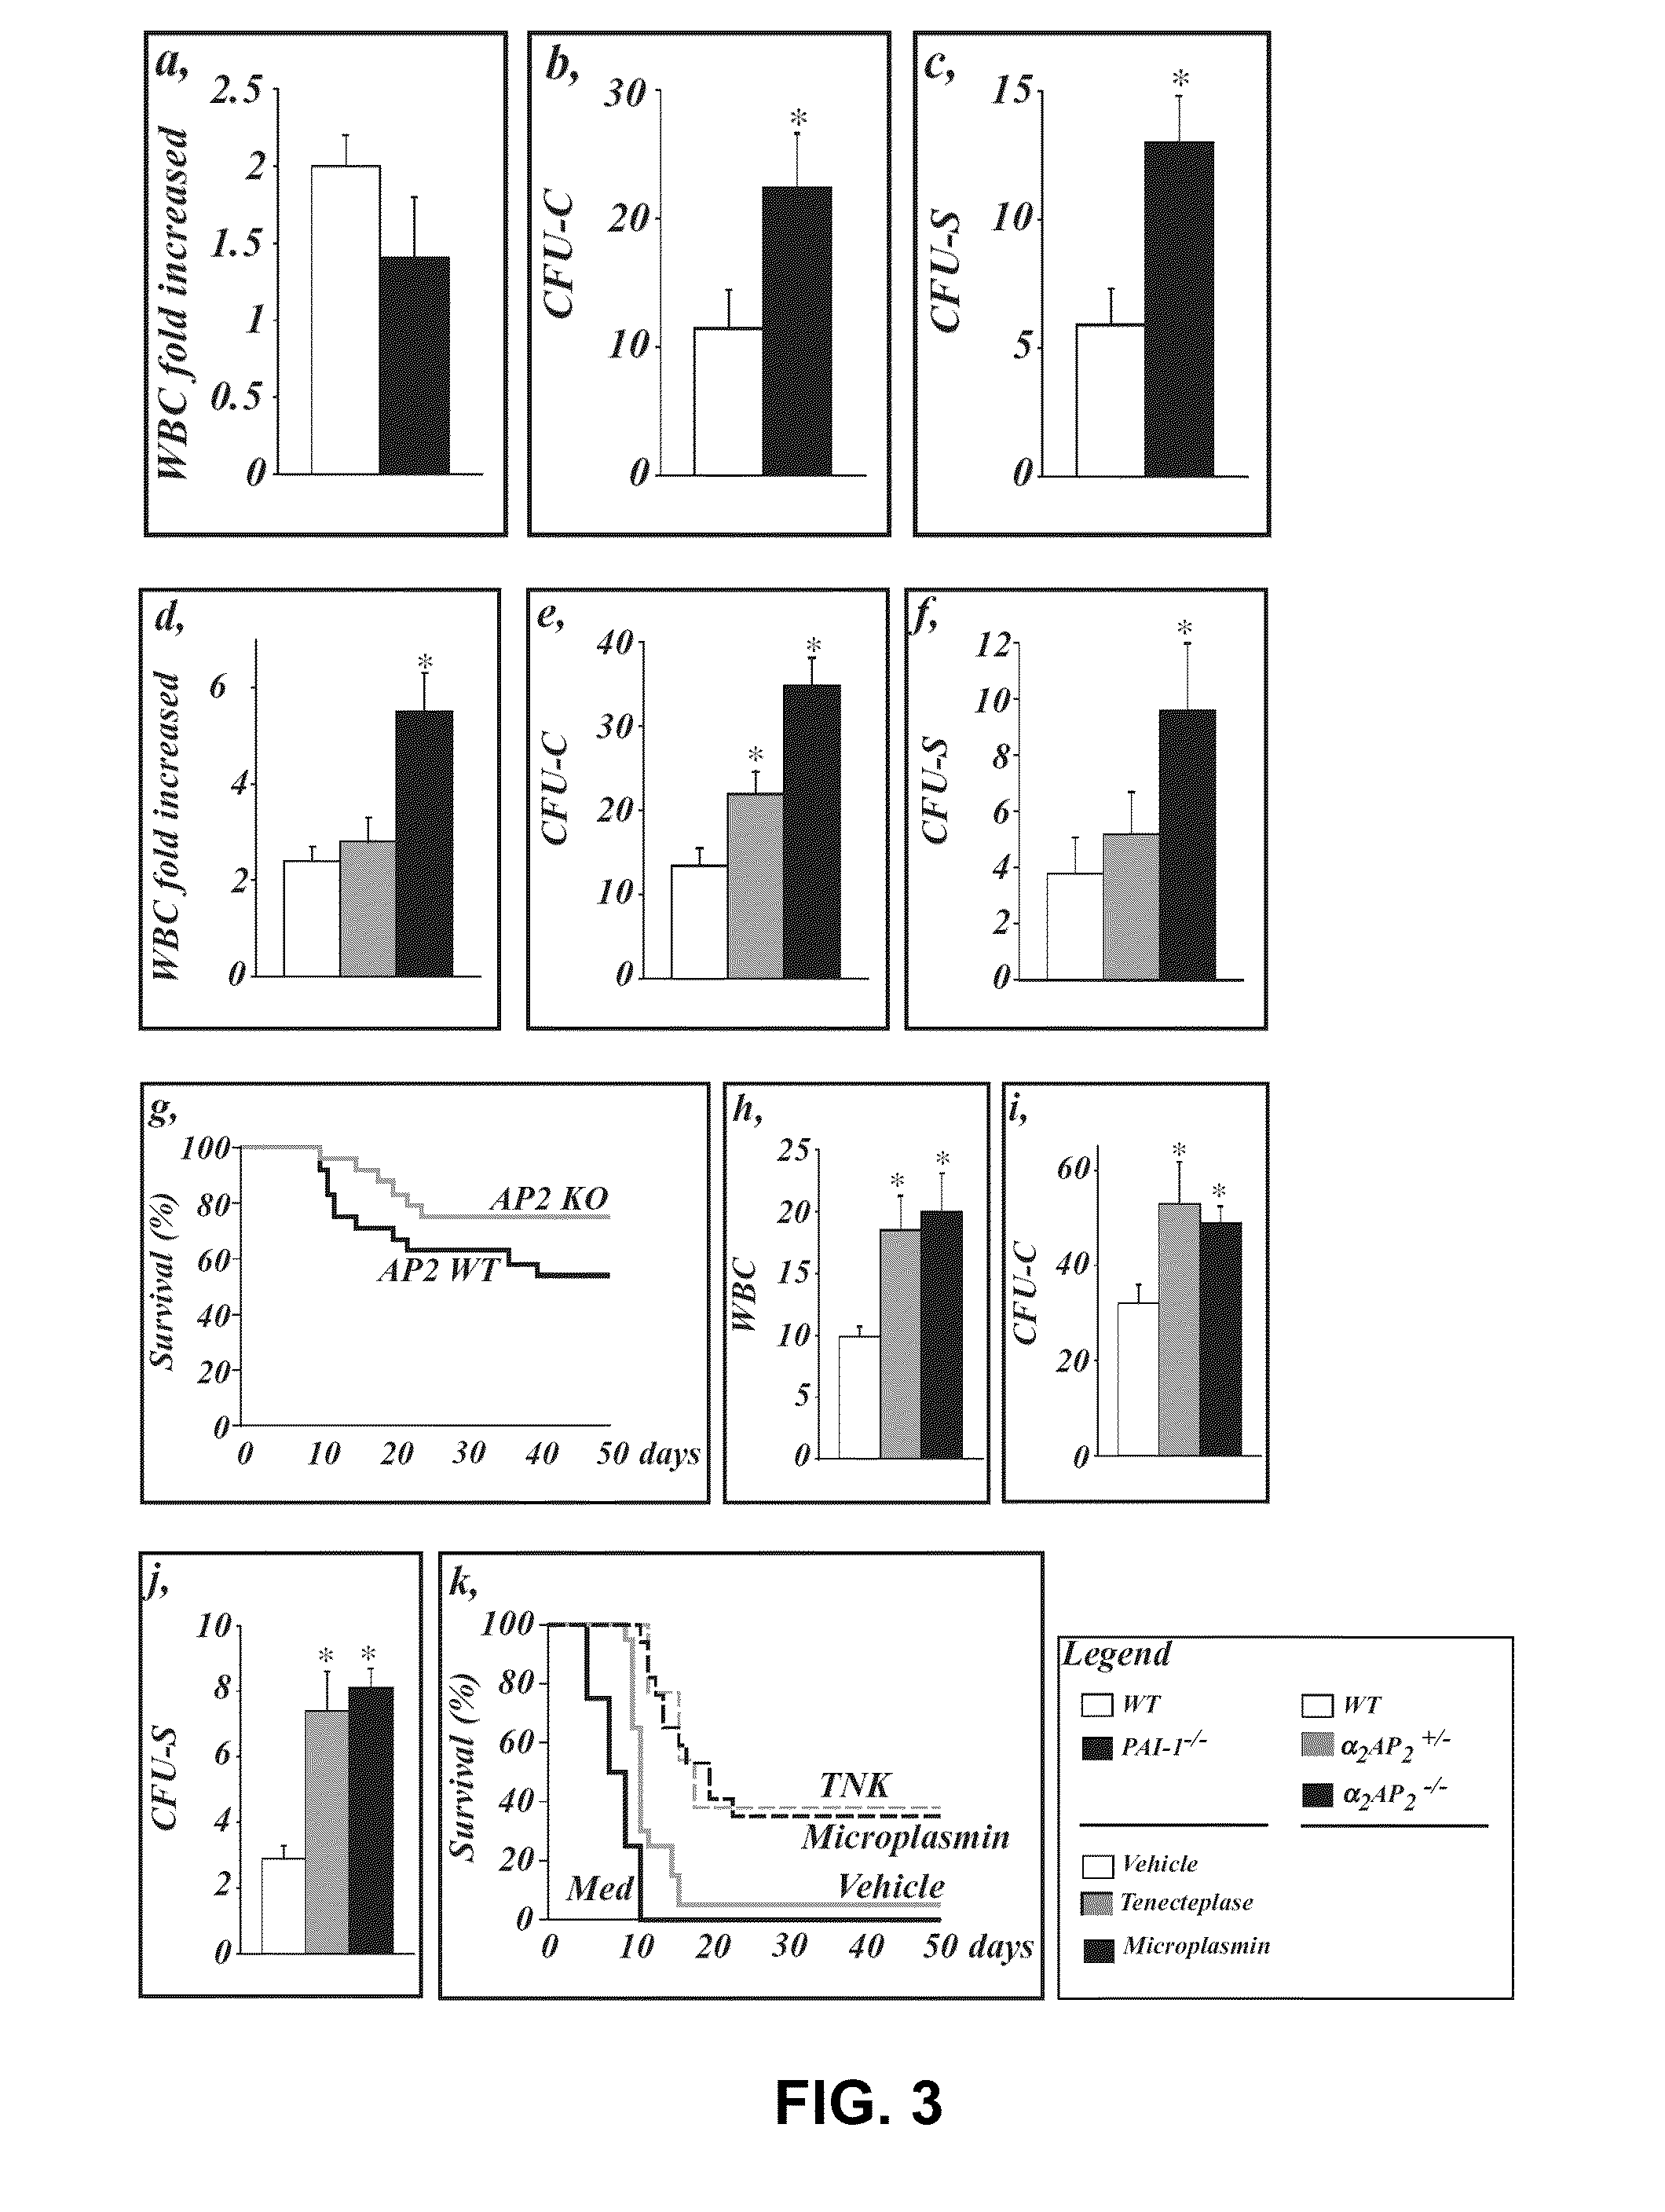 Means and methods for the recruitment and identification of stem cells